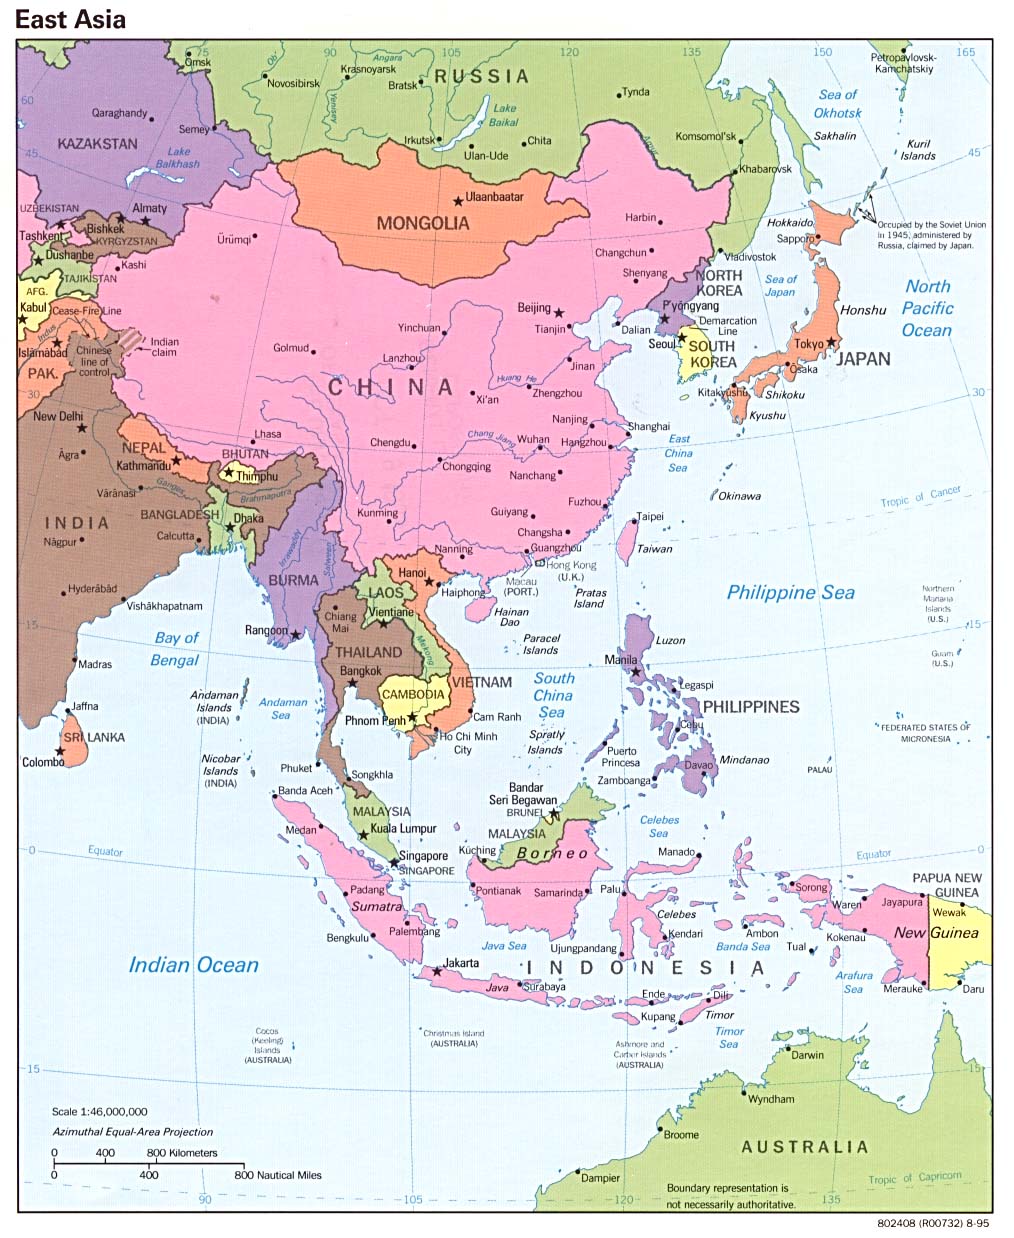 East Asia Political Map 1995 - Full size